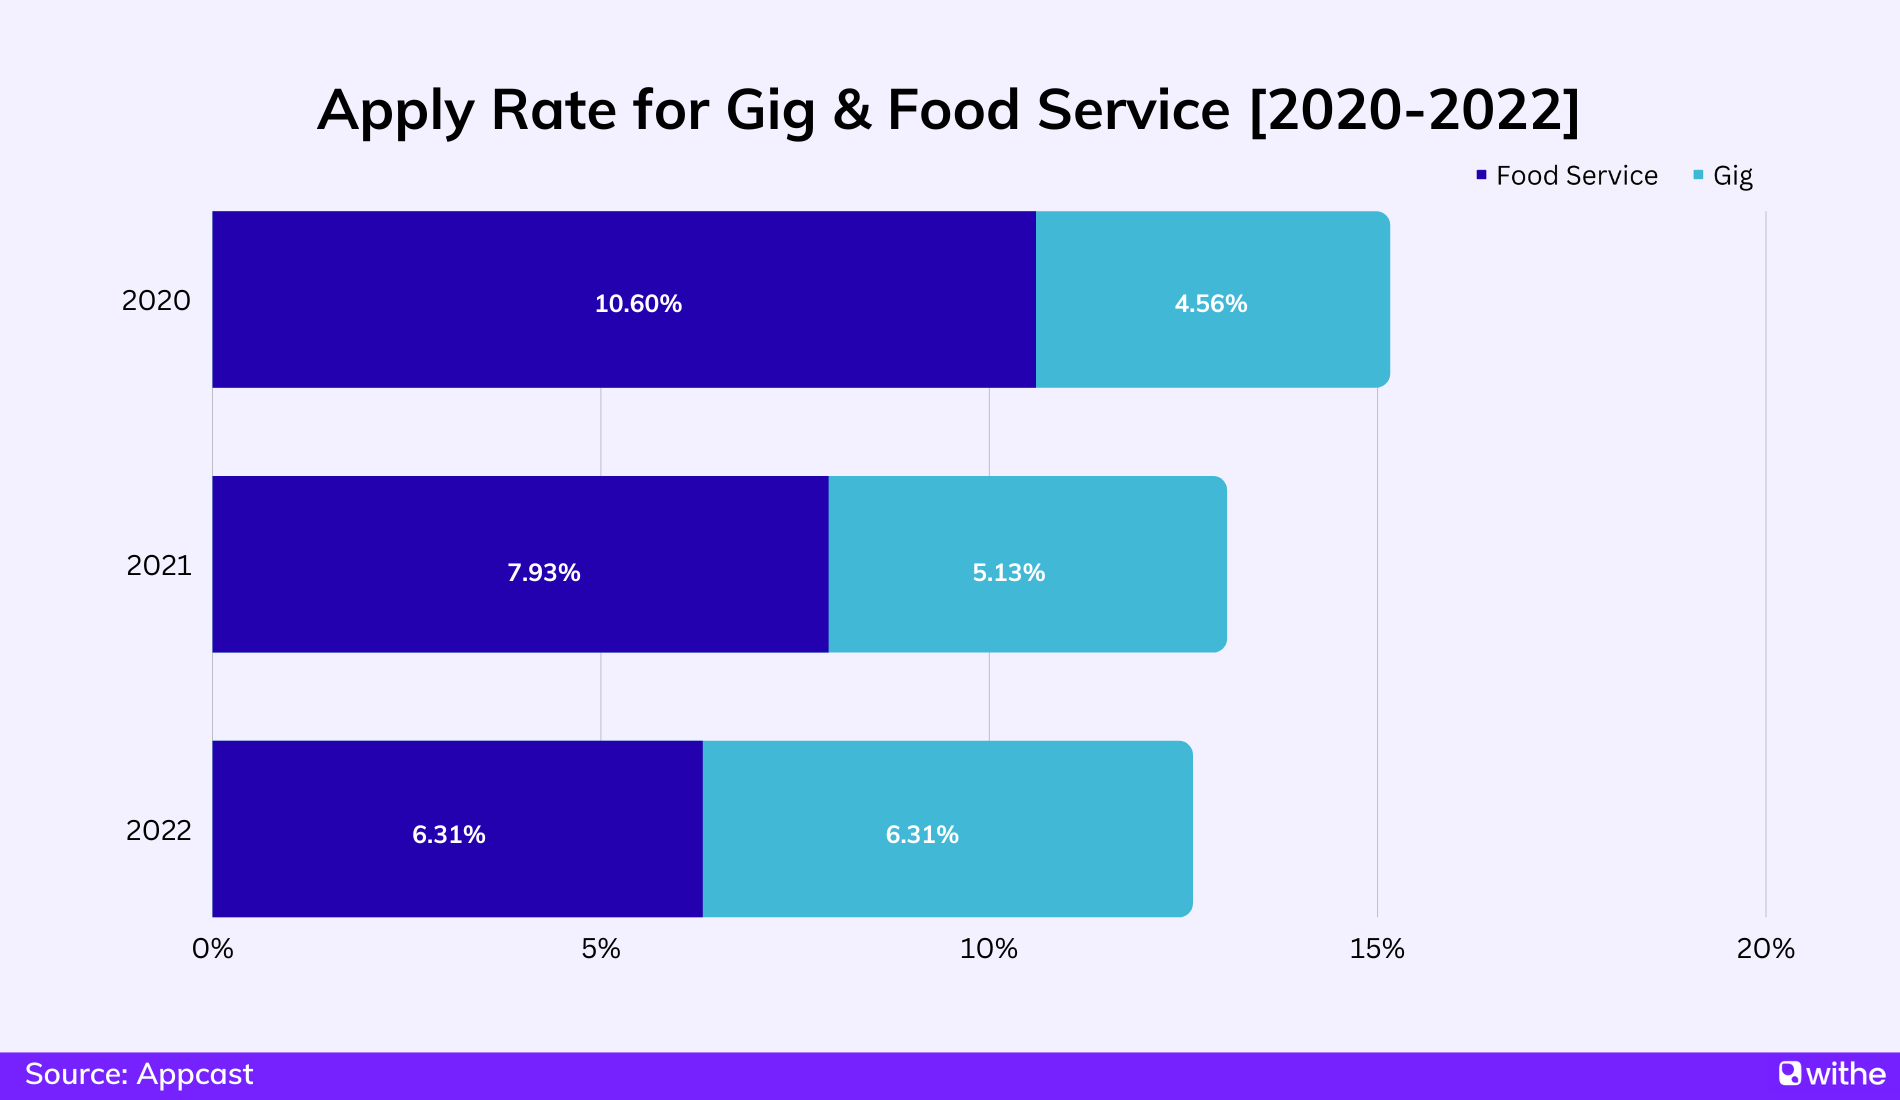 Apply rate for Gig and Food Service from 2020-2022